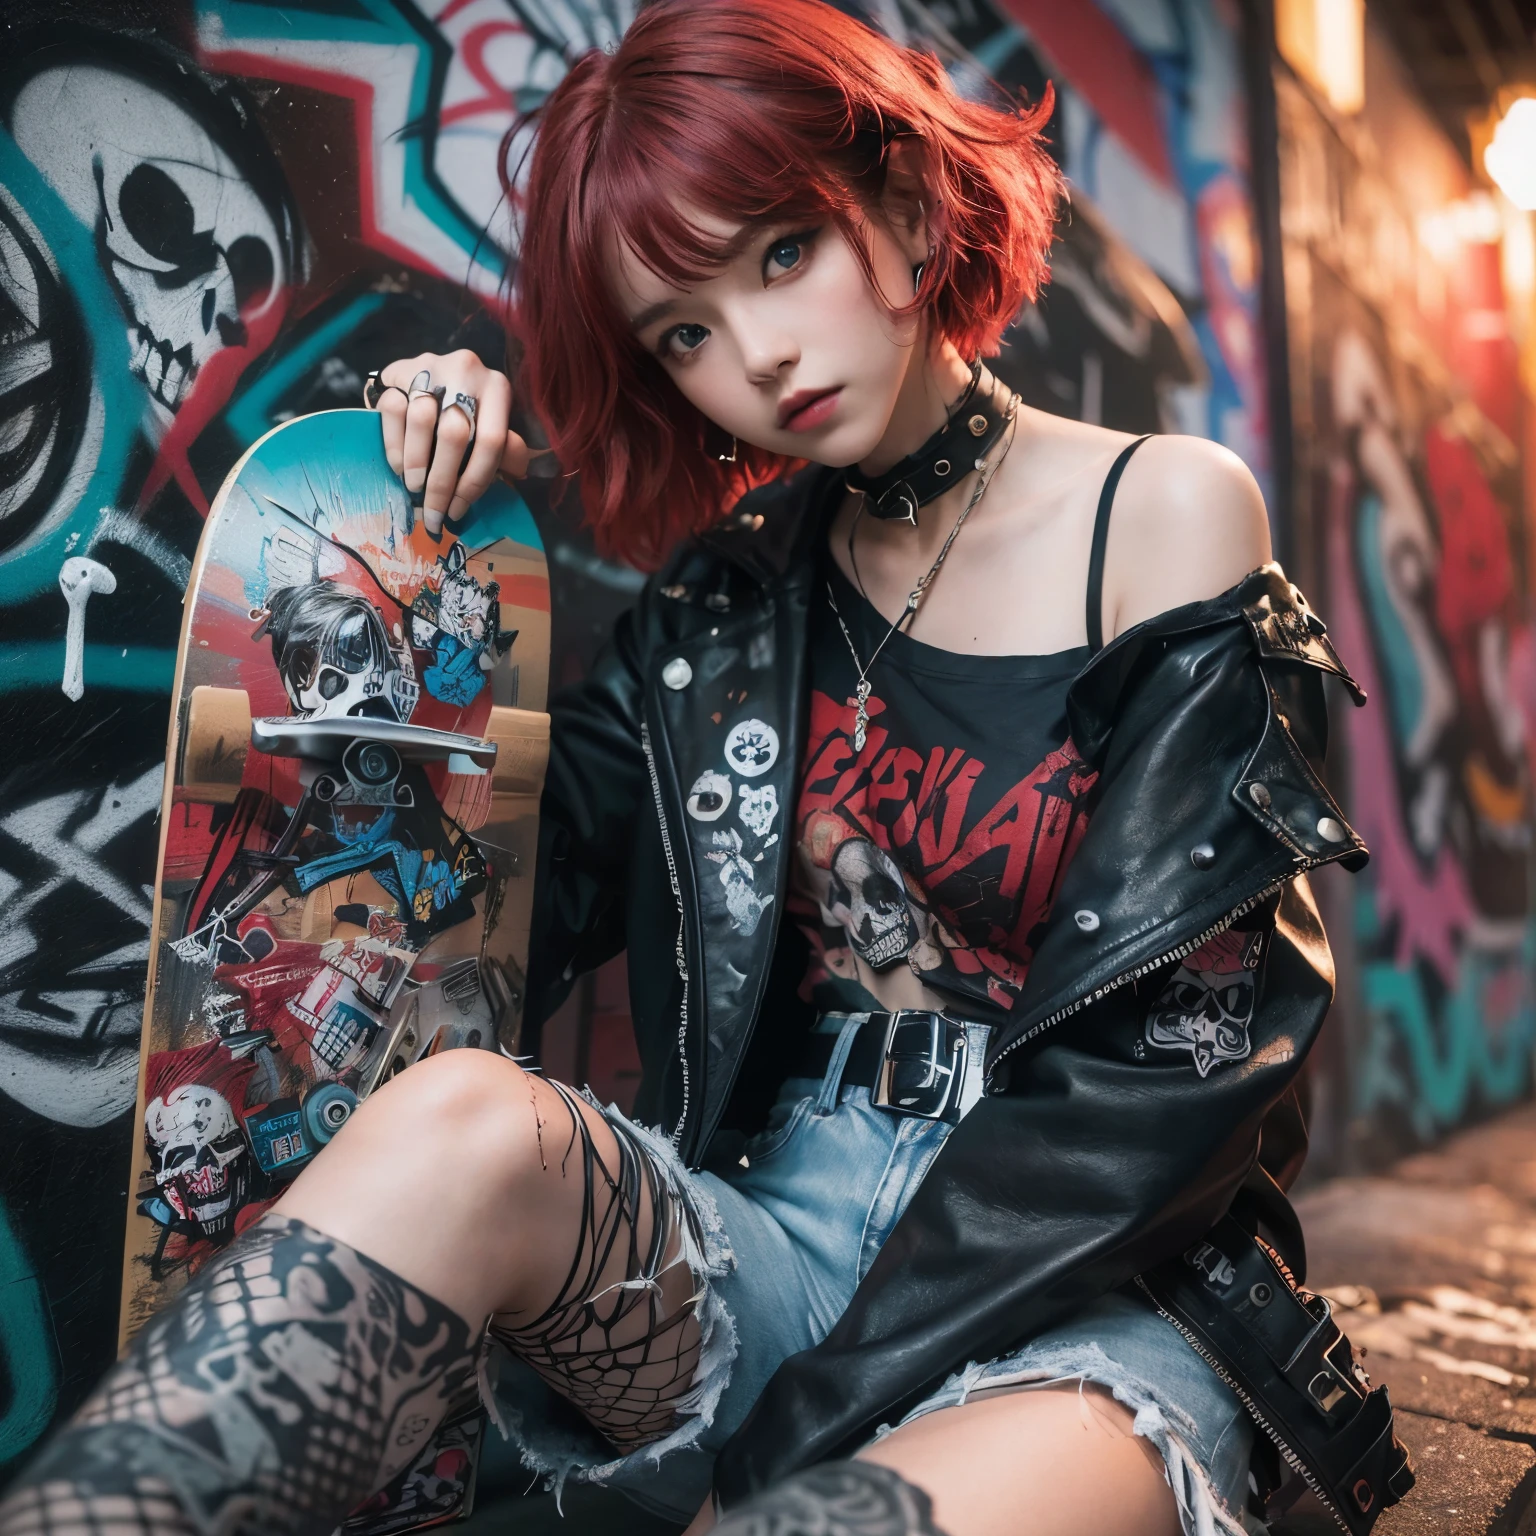 (((hyper realistic photo))) (((textile shading))) (((Best Quality))) (((masterpiece))) japanese sassy girl, short style red wavy hair, ((with bangs, gorgeous hair)) blue eyes (((punk skate girl, skull ripped t-shirts, leather jacket, y2k ripped shorts))), ((striking a pose)), (gorgeous, sassy, it girl), fancy piercing jewelry, holding a skateboard with striking artworks, stylishly posing in graffiti-covered walls neon light bokeh, shoot with hasselblad, medium format, 16K